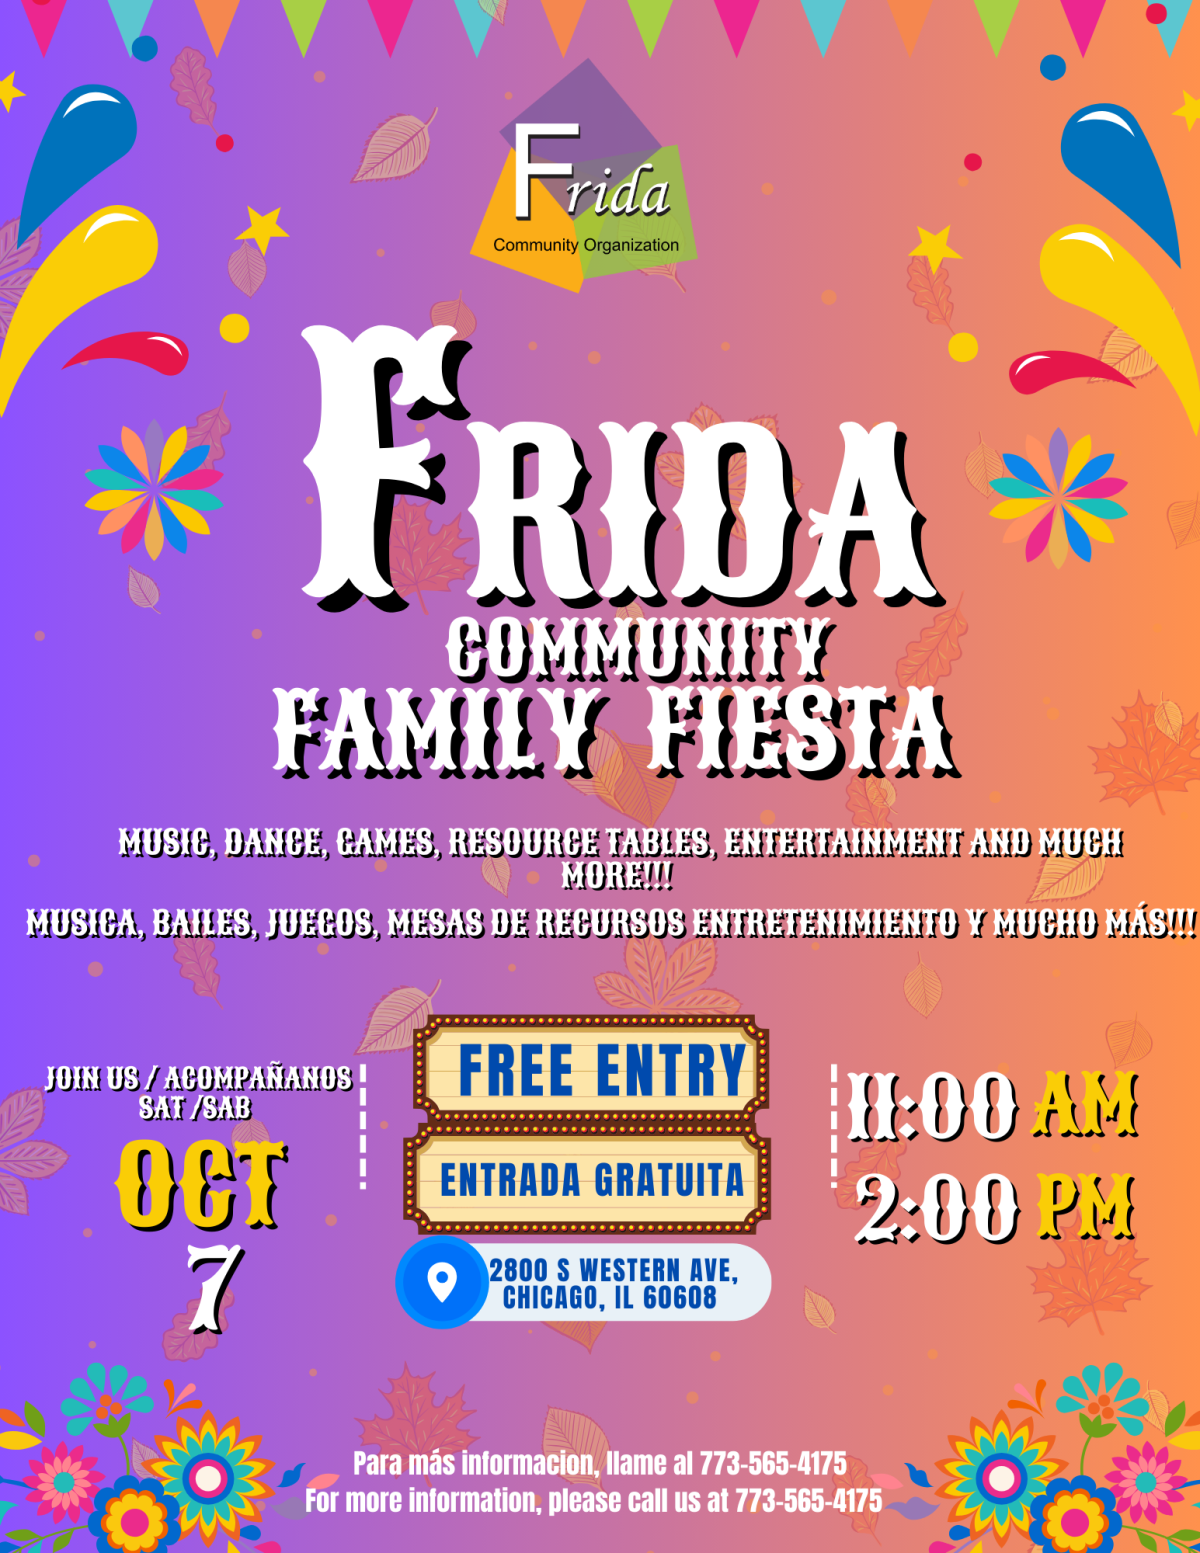 Celebrate Hispanic Heritage Month with COMTO Chicago & Frida at their Family Fiesta